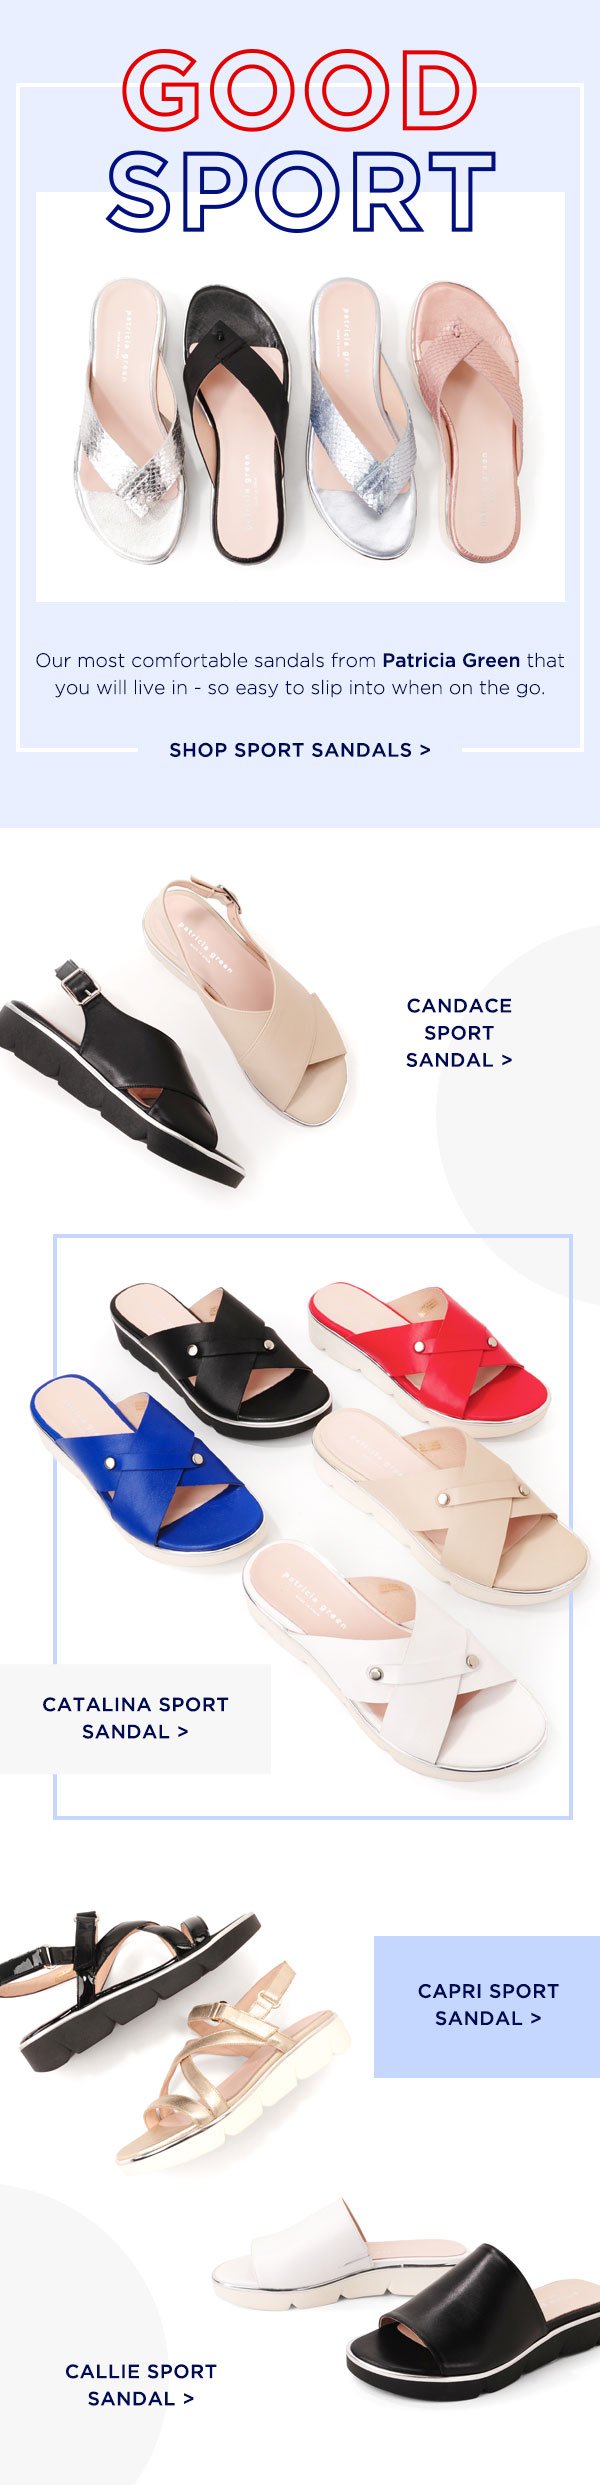 simply shoes sandals